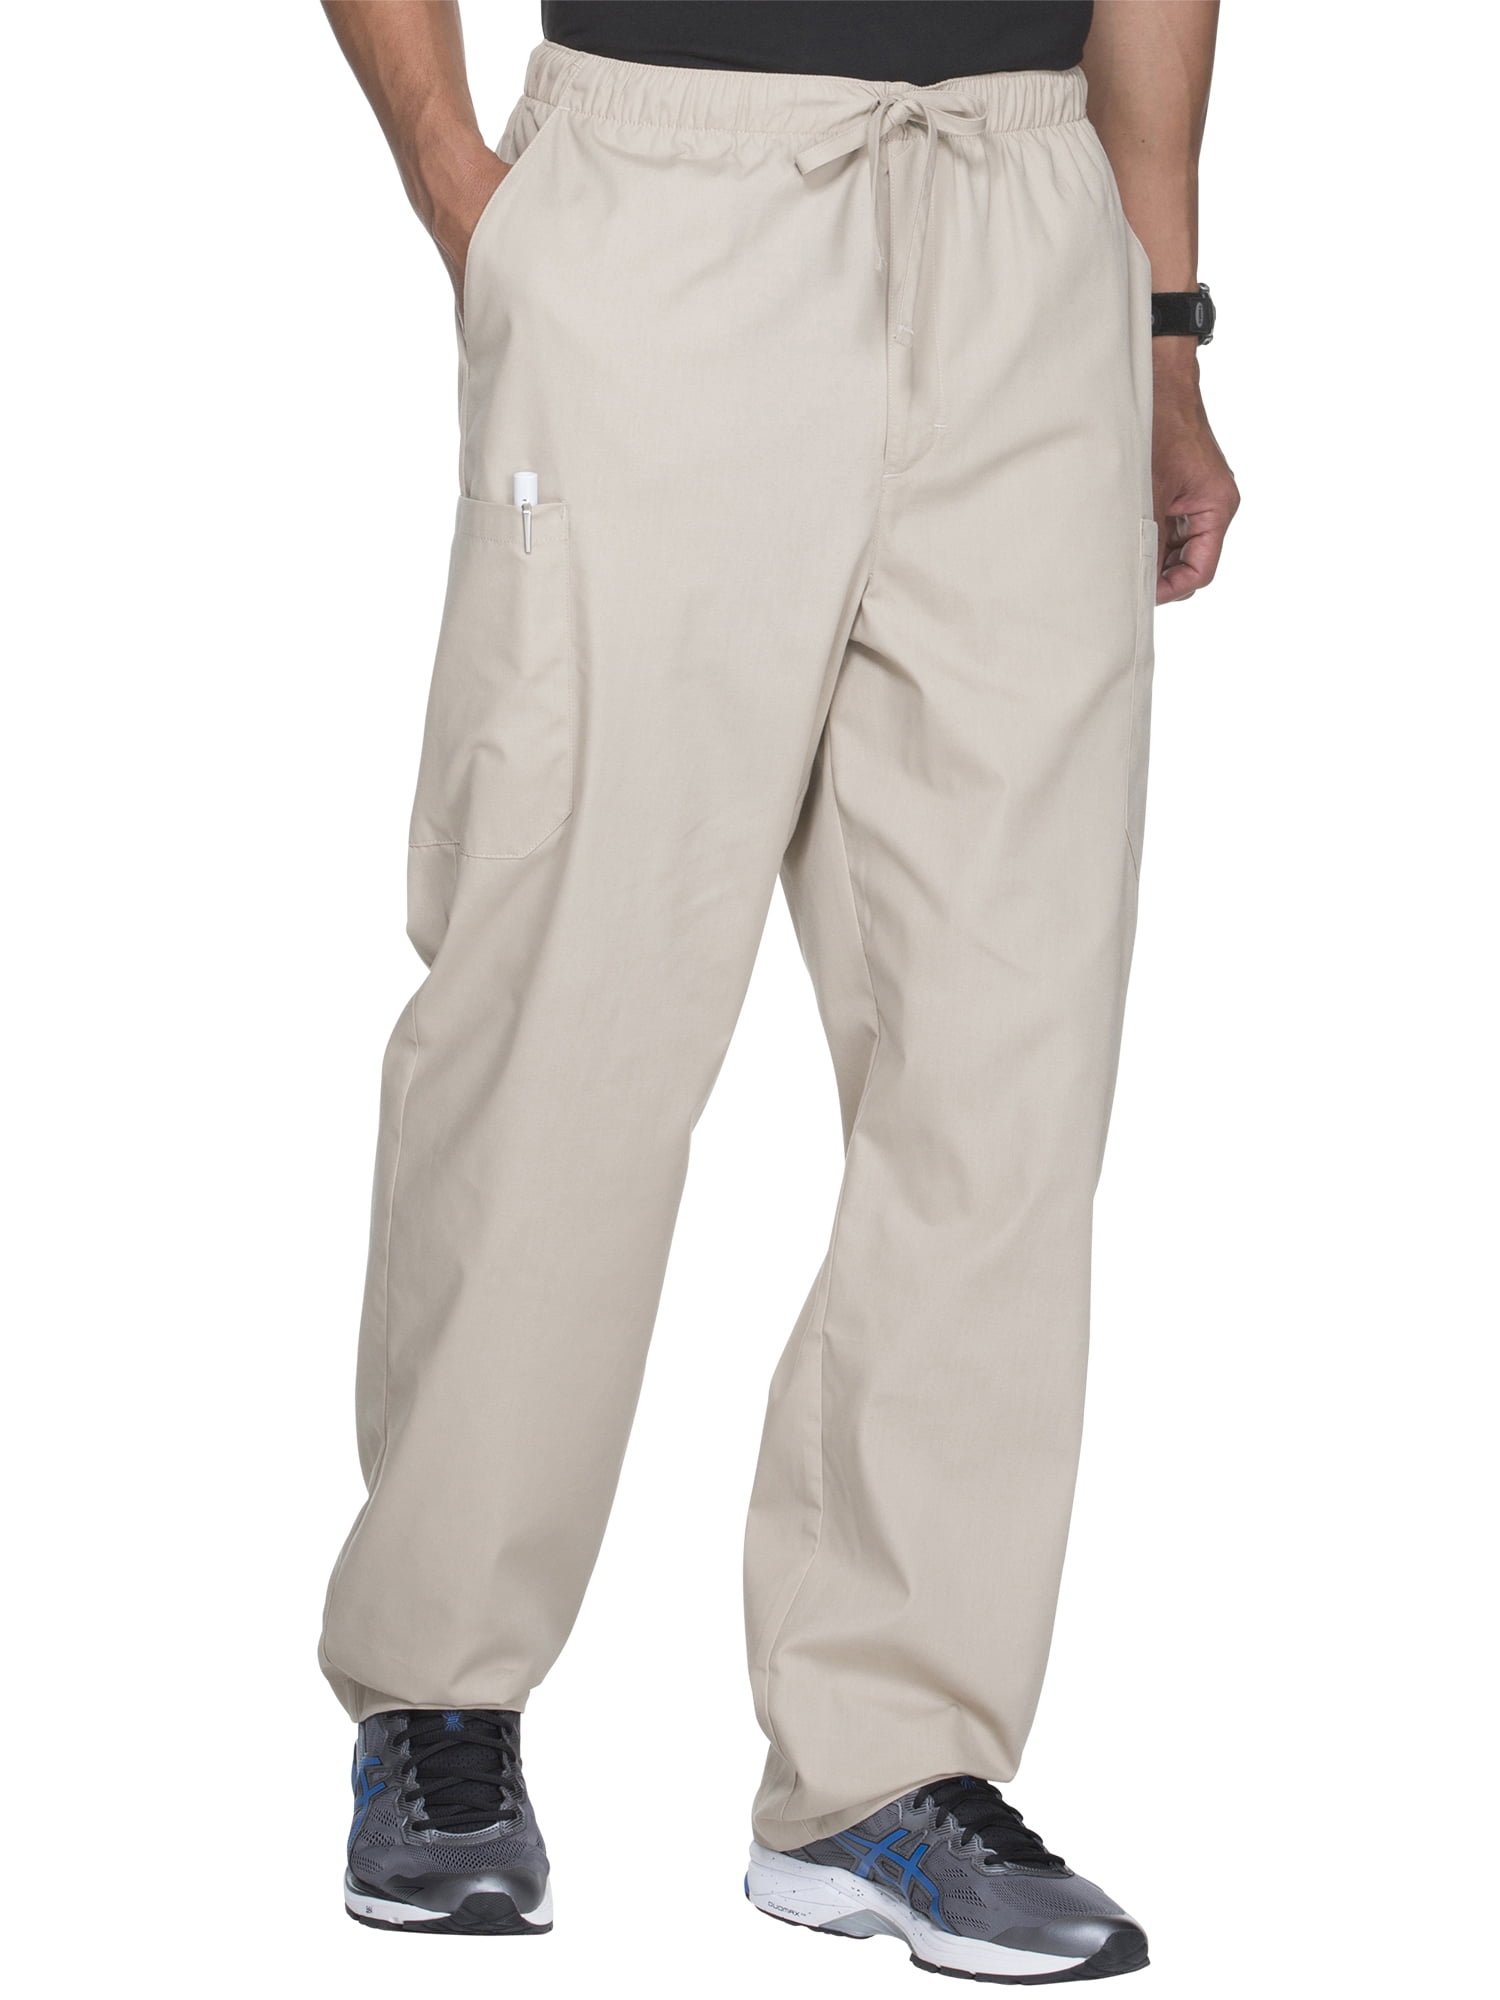 Scrubstar Unisex Core Essentials Pull-On Scrub Pant with Front Zipper ...